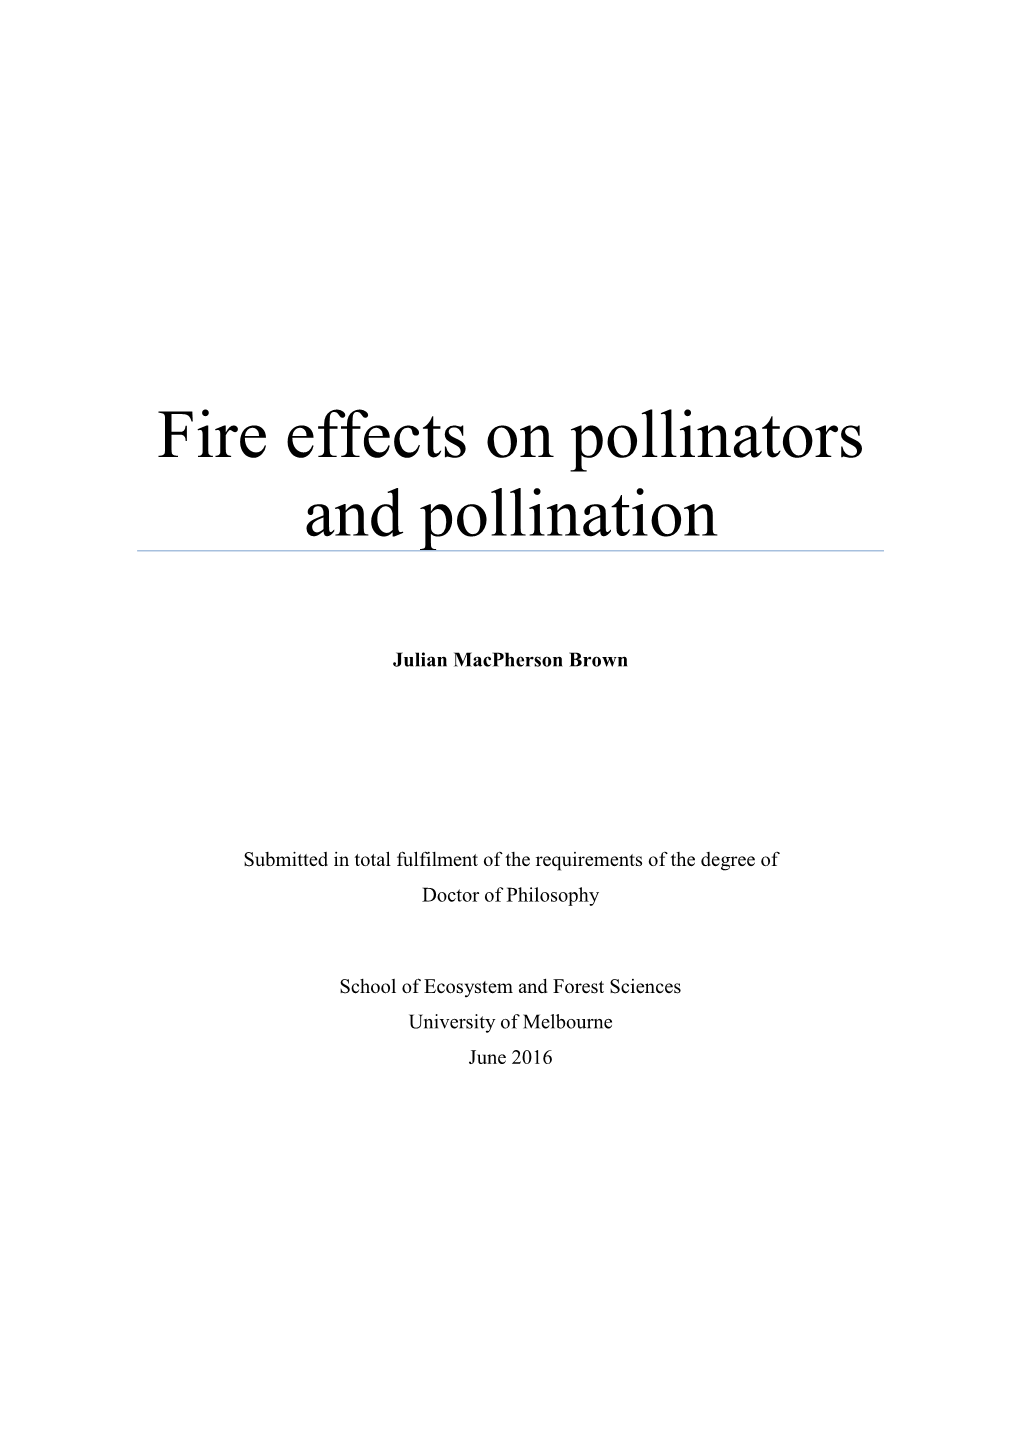 Fire Effects on Pollinators and Pollination